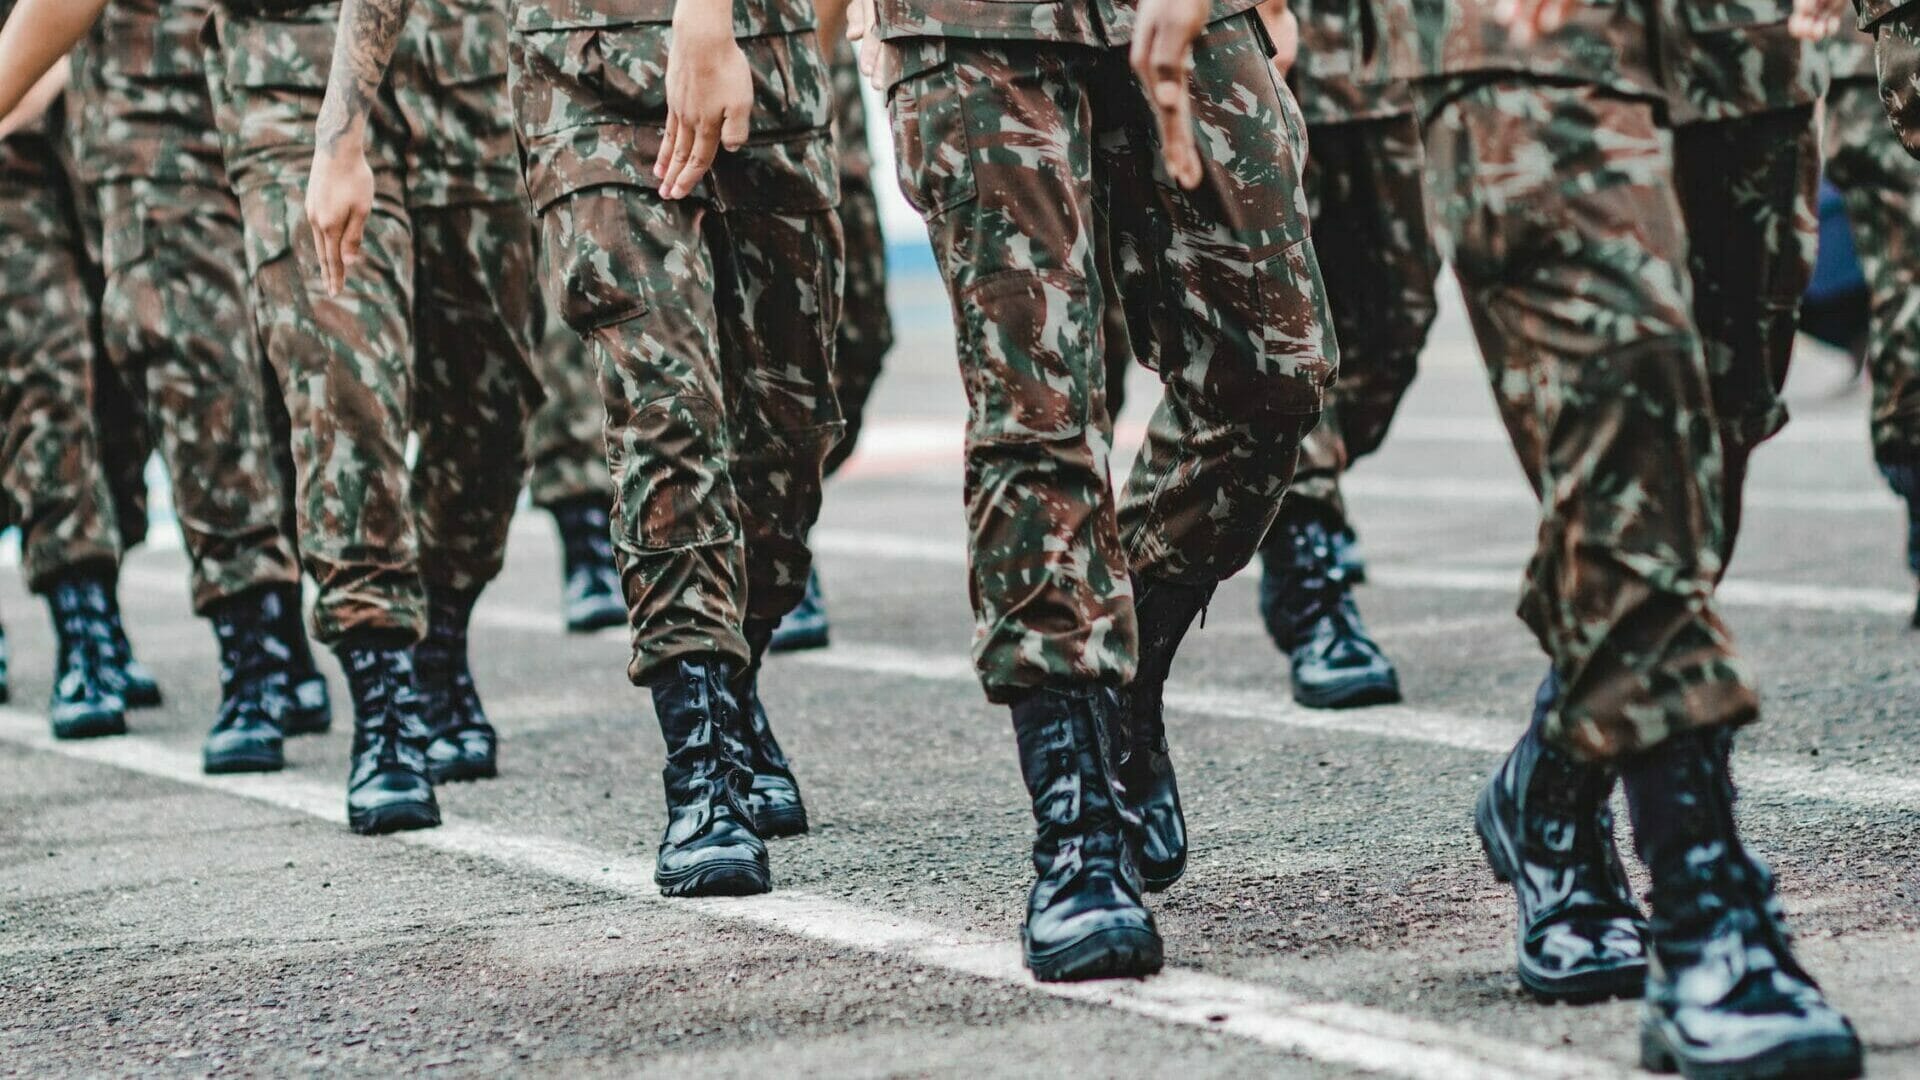 Why Do Special Forces Wear Hiking Boots